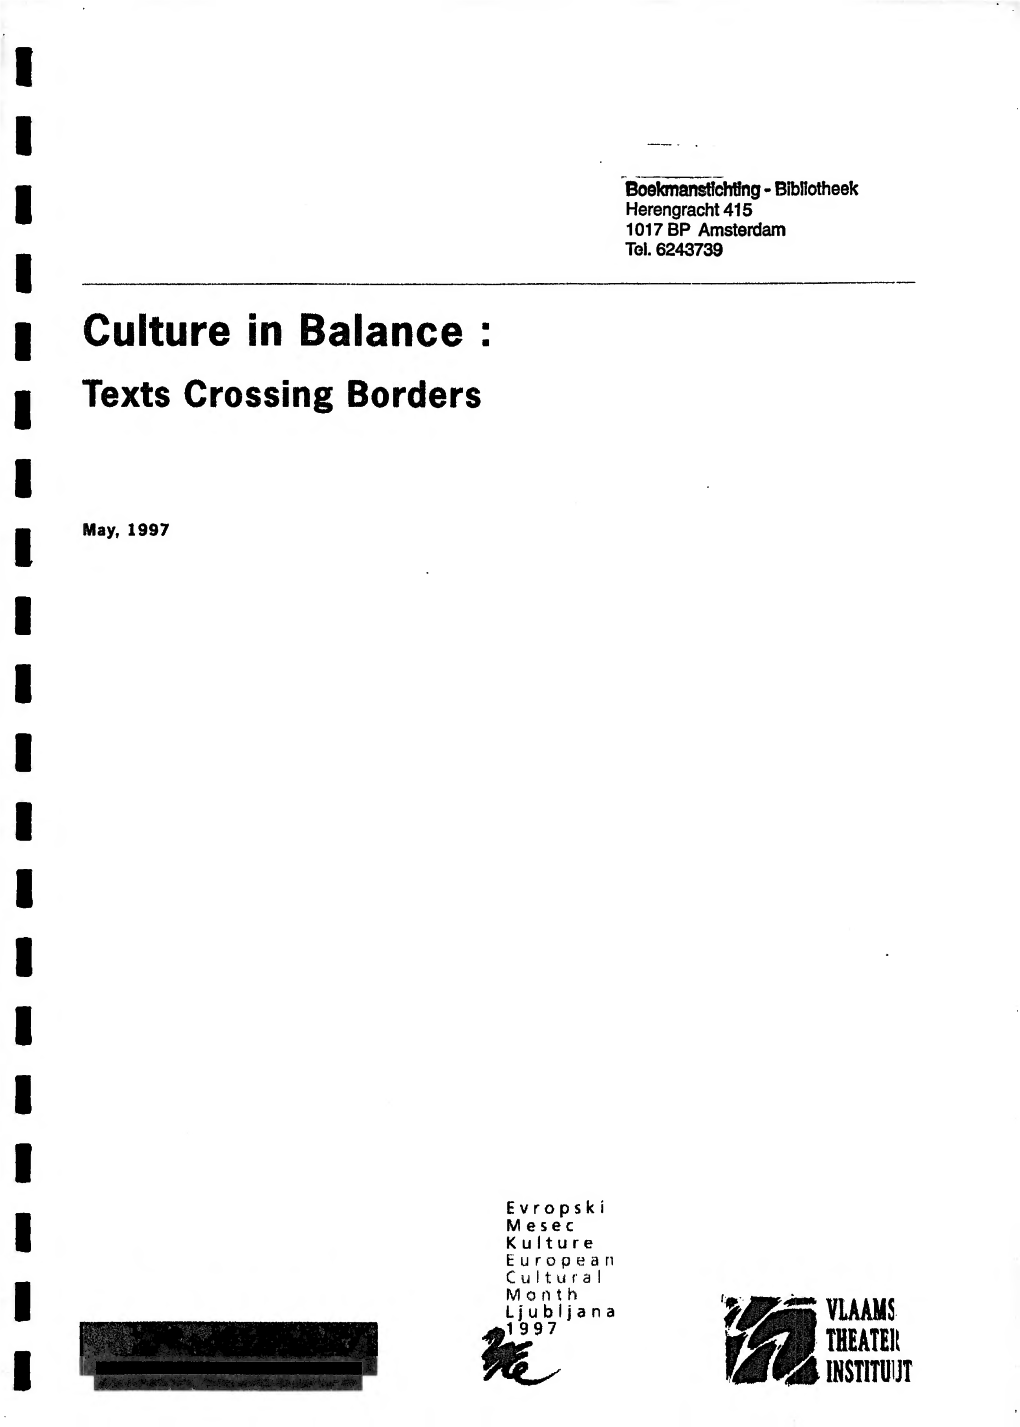 Culture in Balance : Texts Crossing Borders